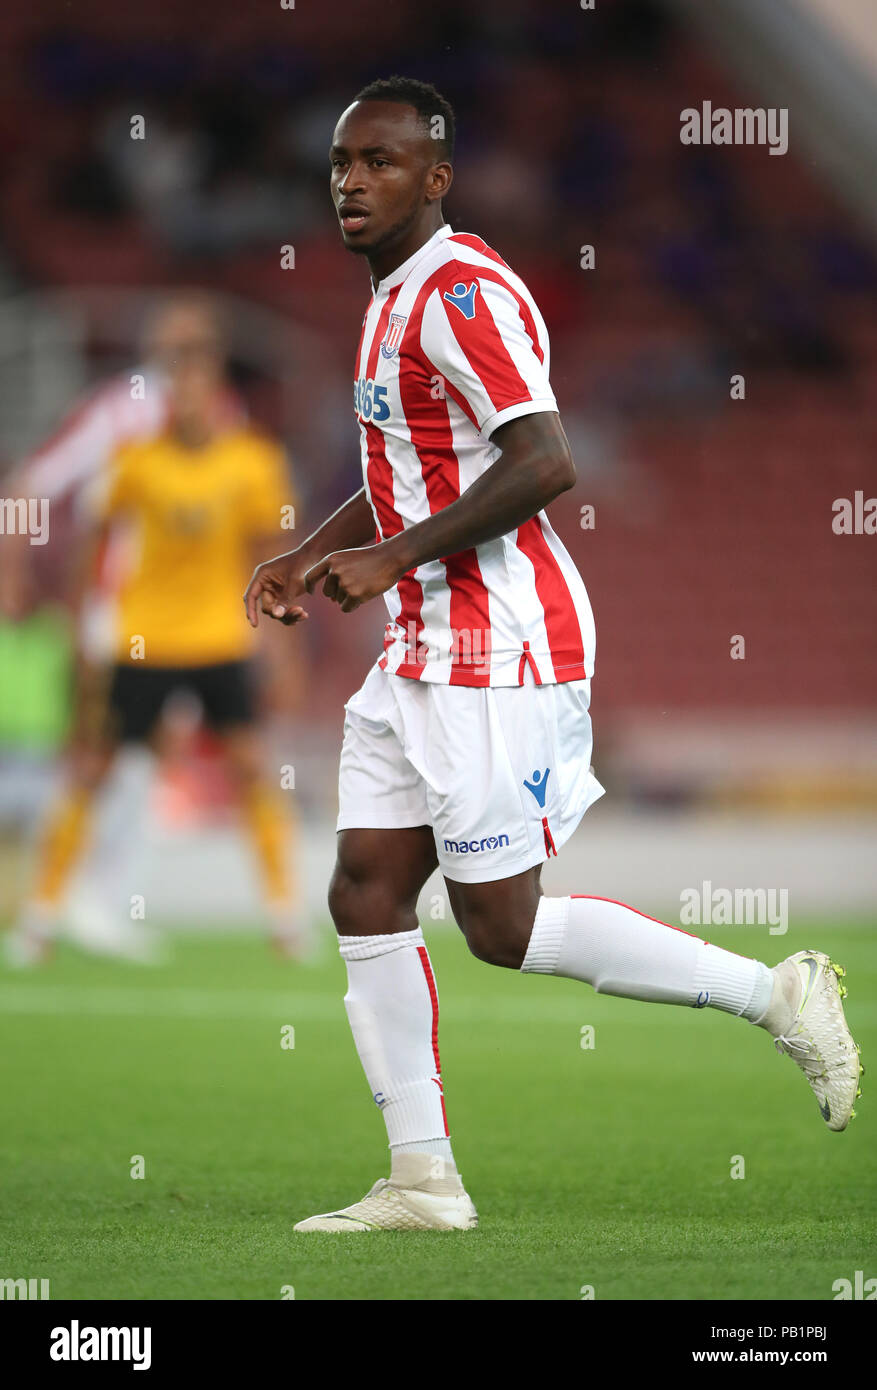 Stoke City's Saido Berahino during a pre season friendly match at The Bet365 Stadium, Stoke. PRESS ASSOCIATION Photo. Picture date: Wednesday July 25, 2018. Photo credit should read: Nick Potts/PA Wire. EDITORIAL USE ONLY No use with unauthorised audio, video, data, fixture lists, club/league logos or 'live' services. Online in-match use limited to 75 images, no video emulation. No use in betting, games or single club/league/player publications. Stock Photo